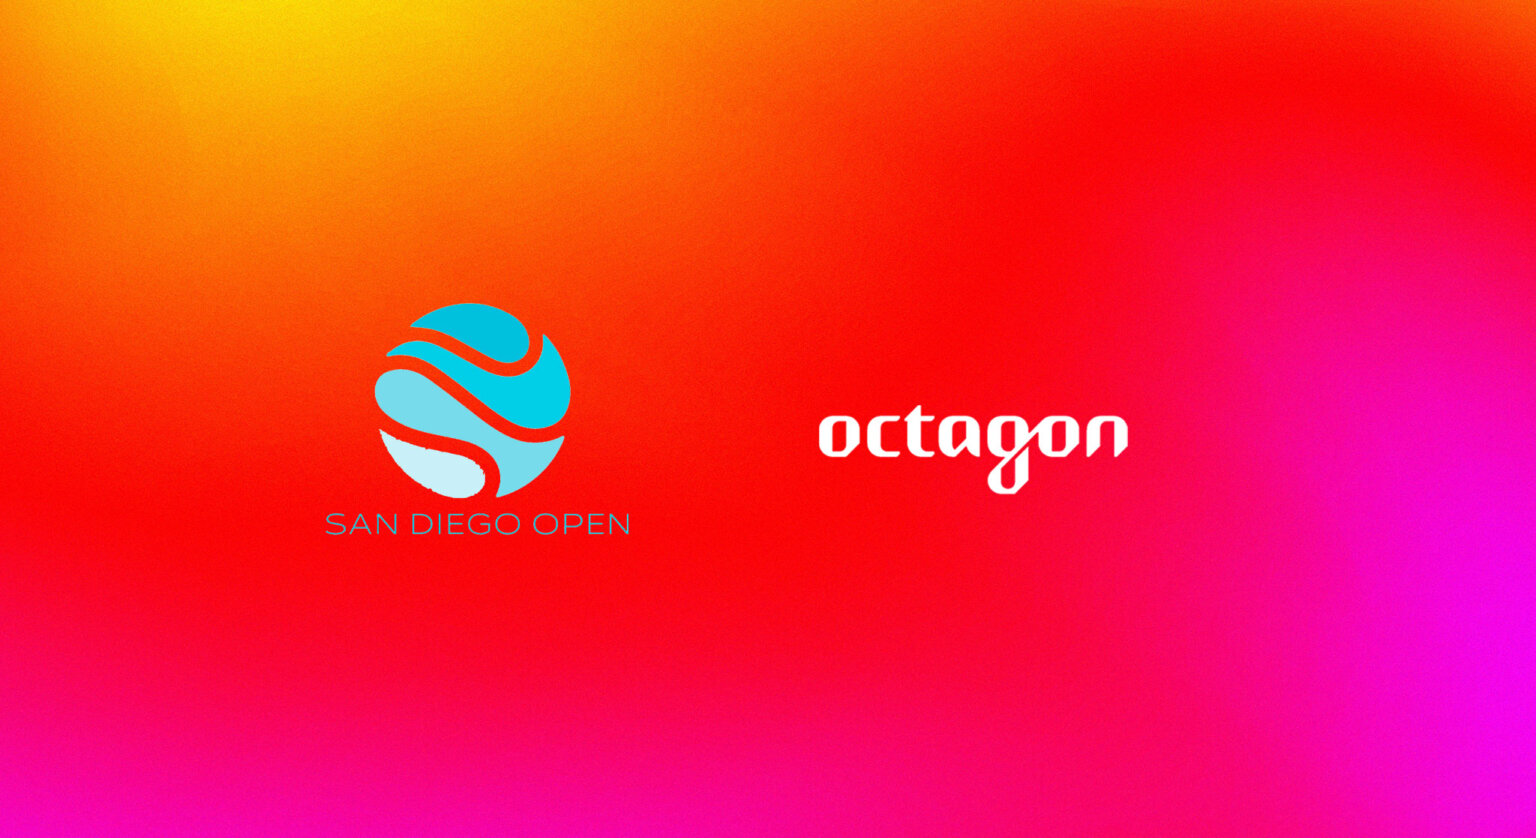 Octagon And WTA Announce Inaugural “San Diego Open” Tournament To Debut